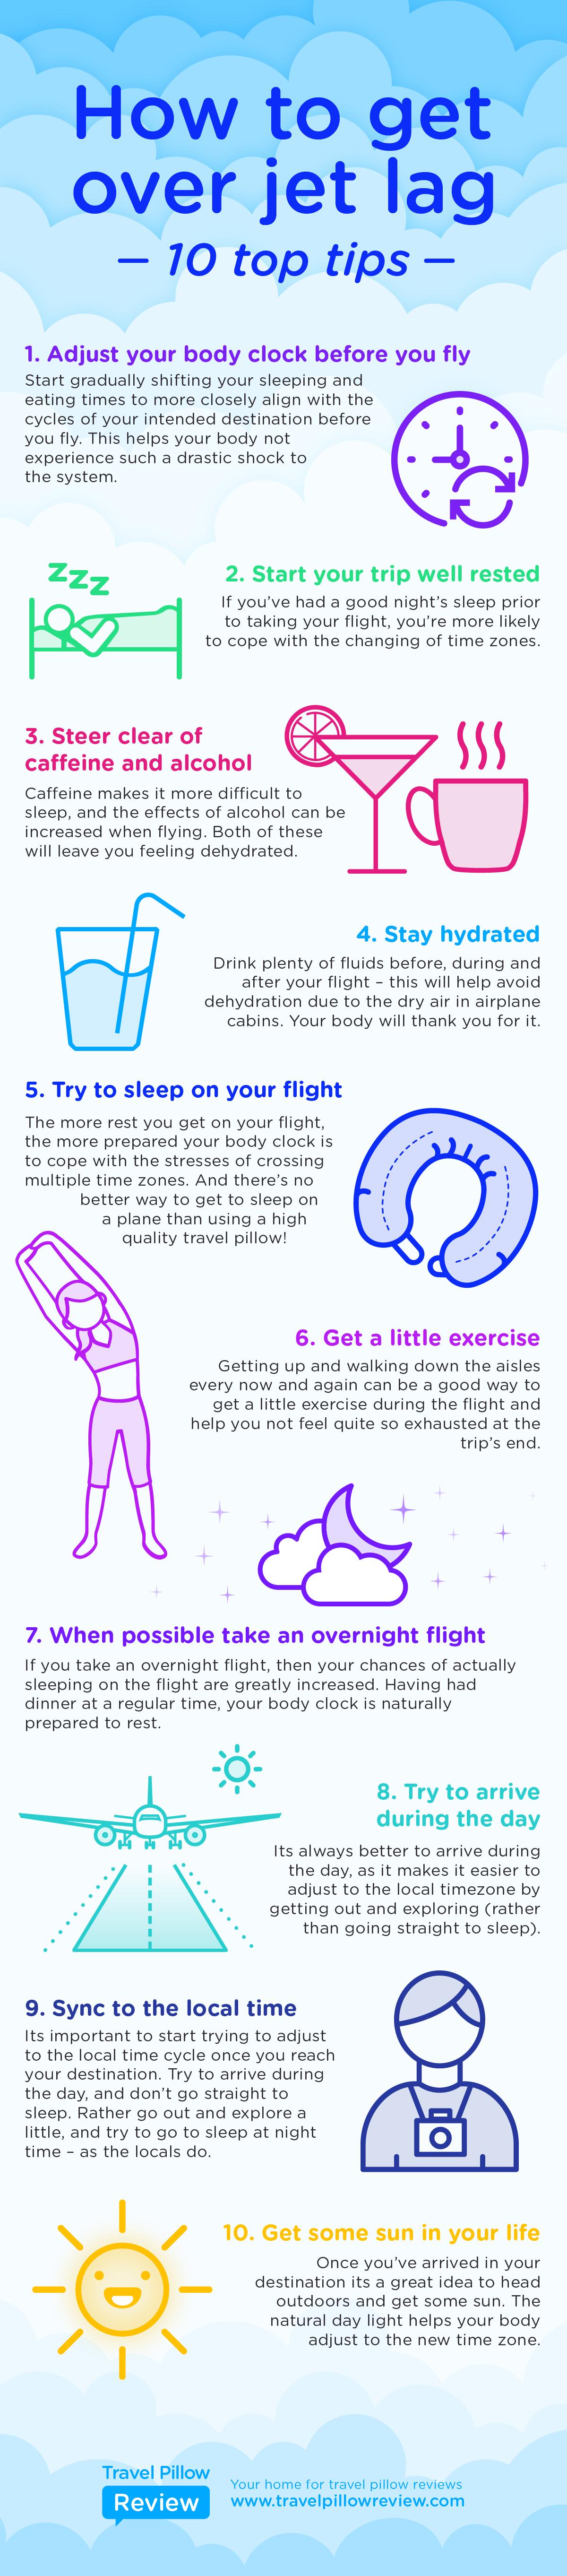 How to get over jet lag Infographic